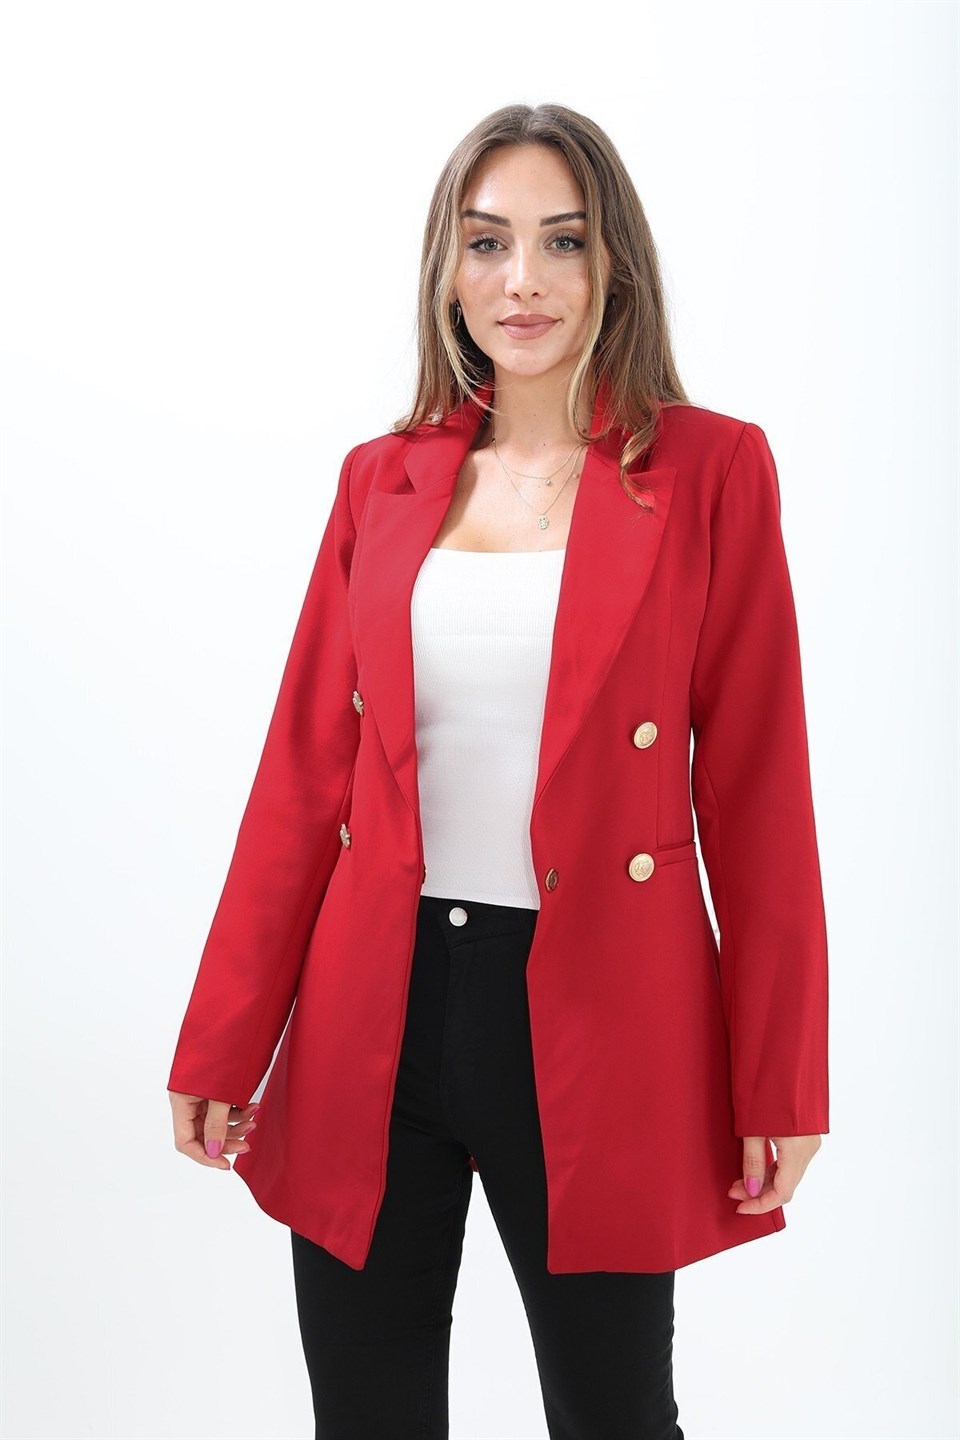 Padded Shoulders with Snap Fasteners on the Front - Women's Blazer Jacket - Red - STREETMODE™